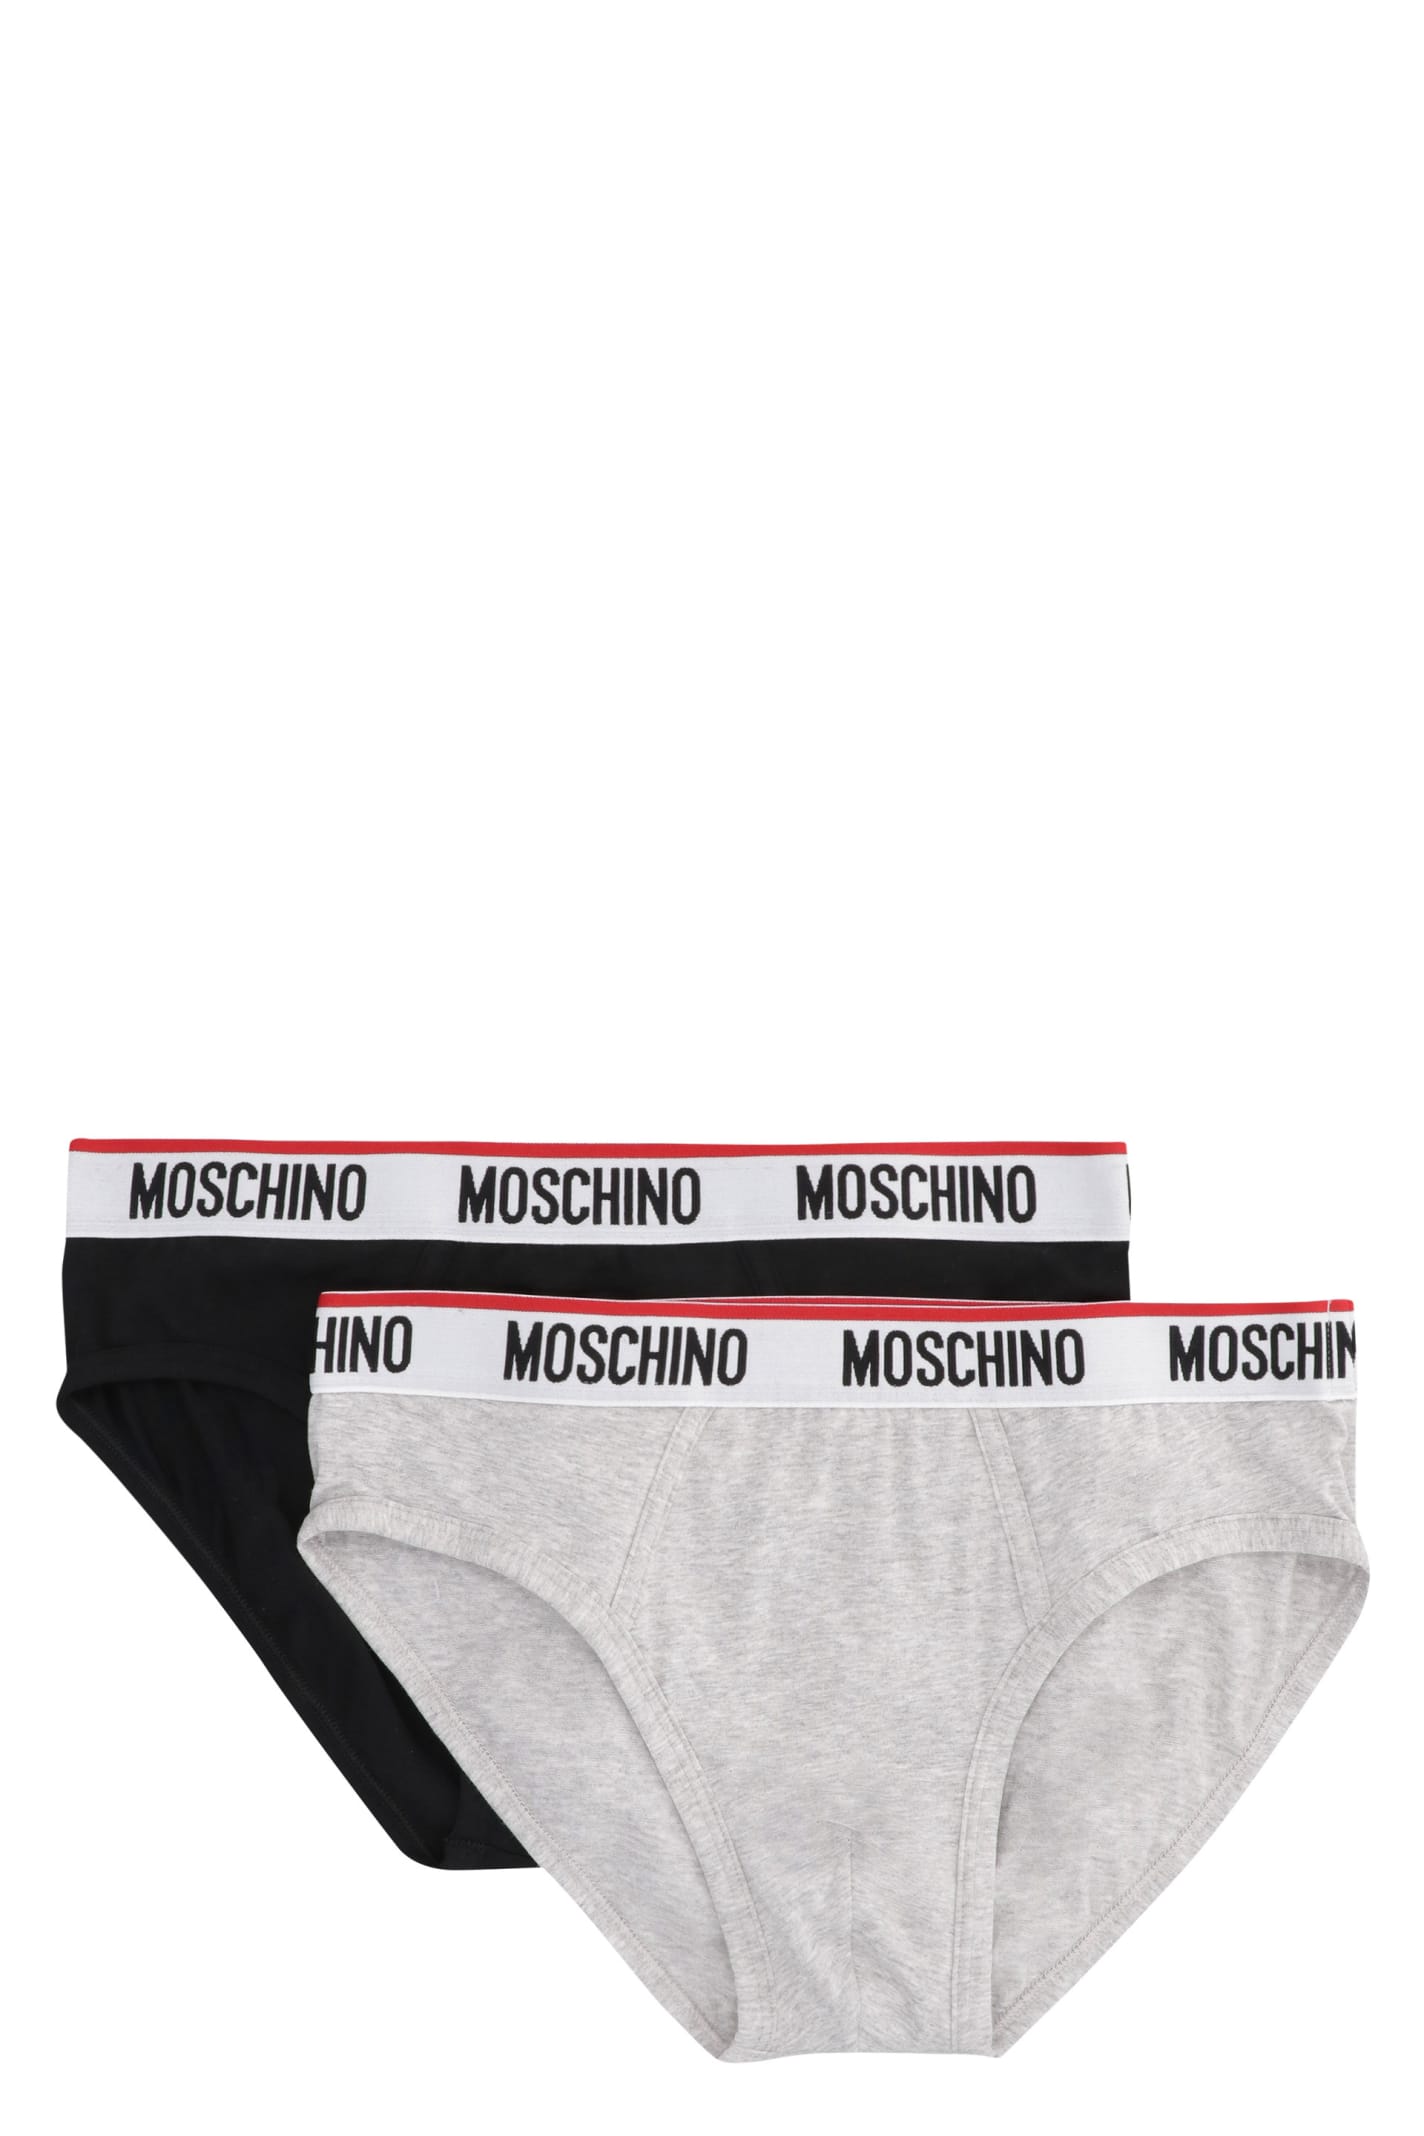 MOSCHINO SET OF TWO LOGO BAND BRIEFS